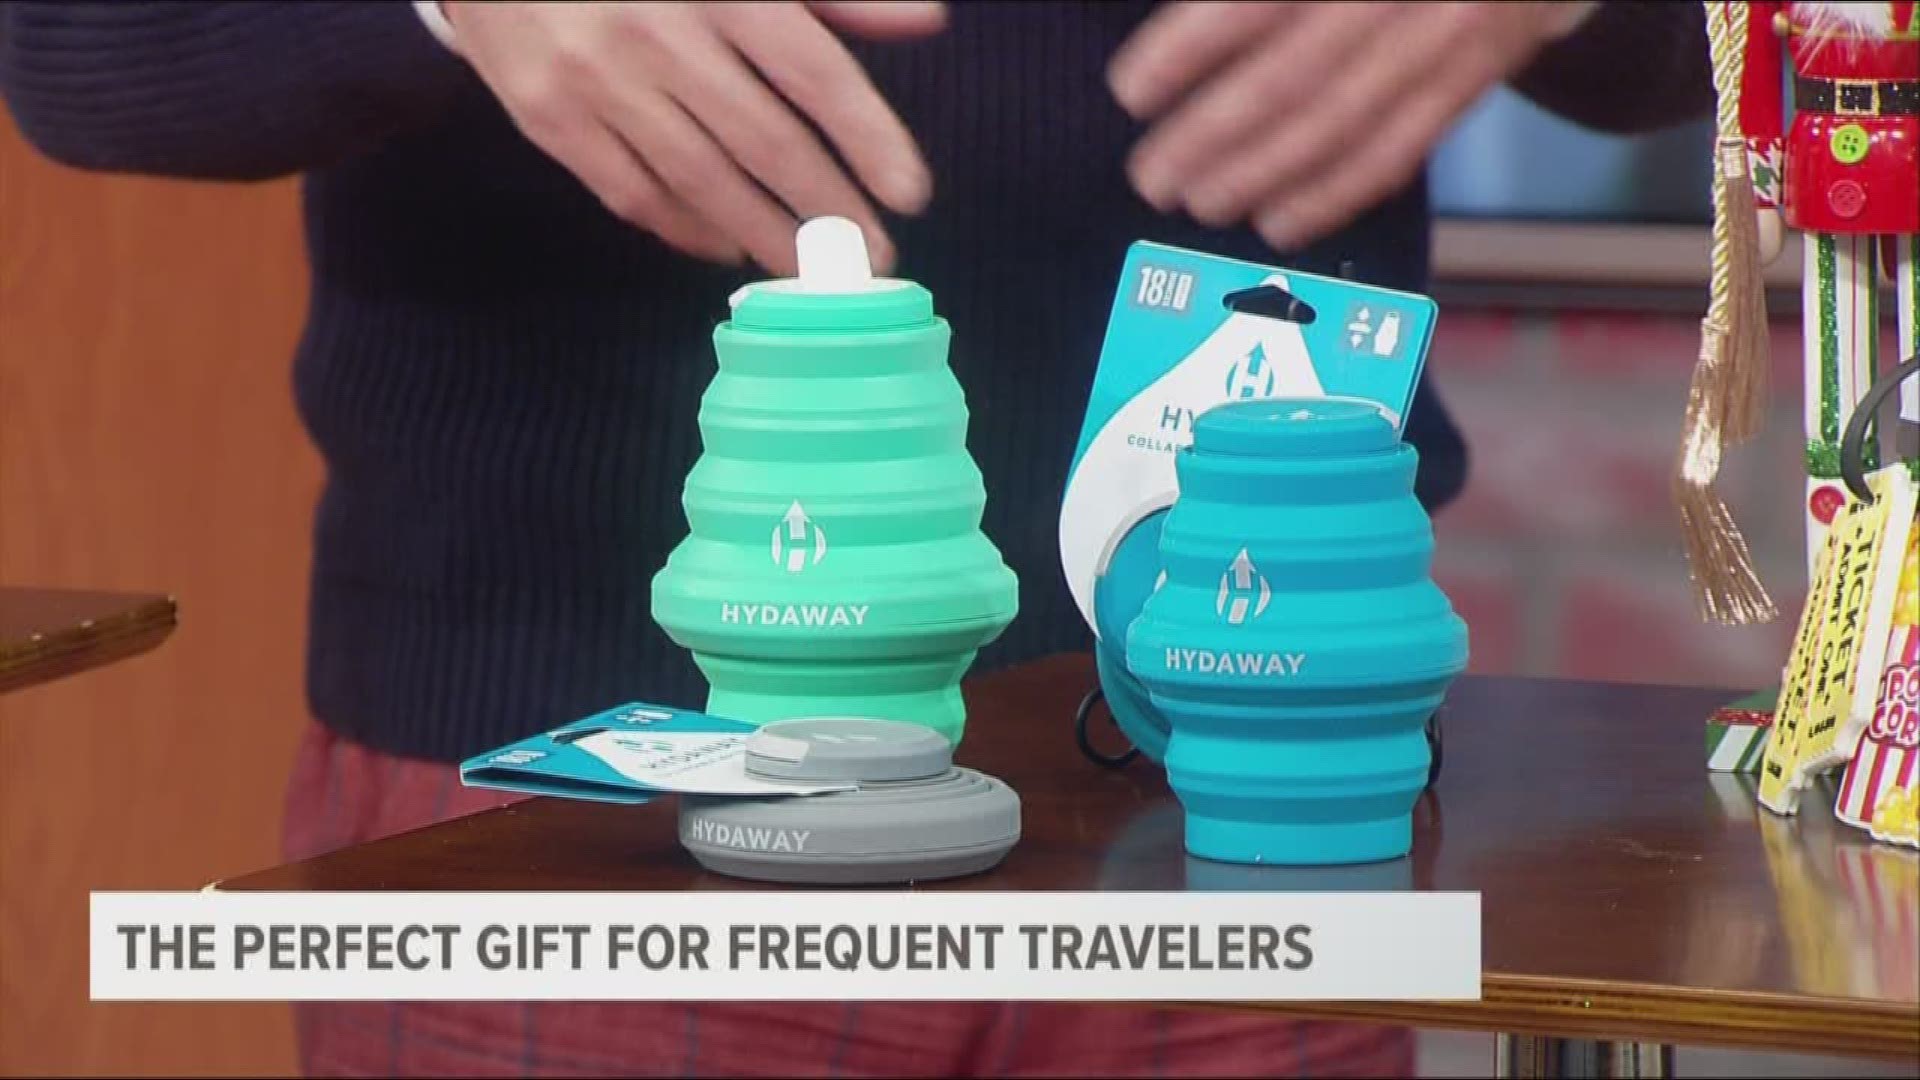 Travel journalist Troy Petenbrink shares some great gift ideas for that frequent traveler in your life.